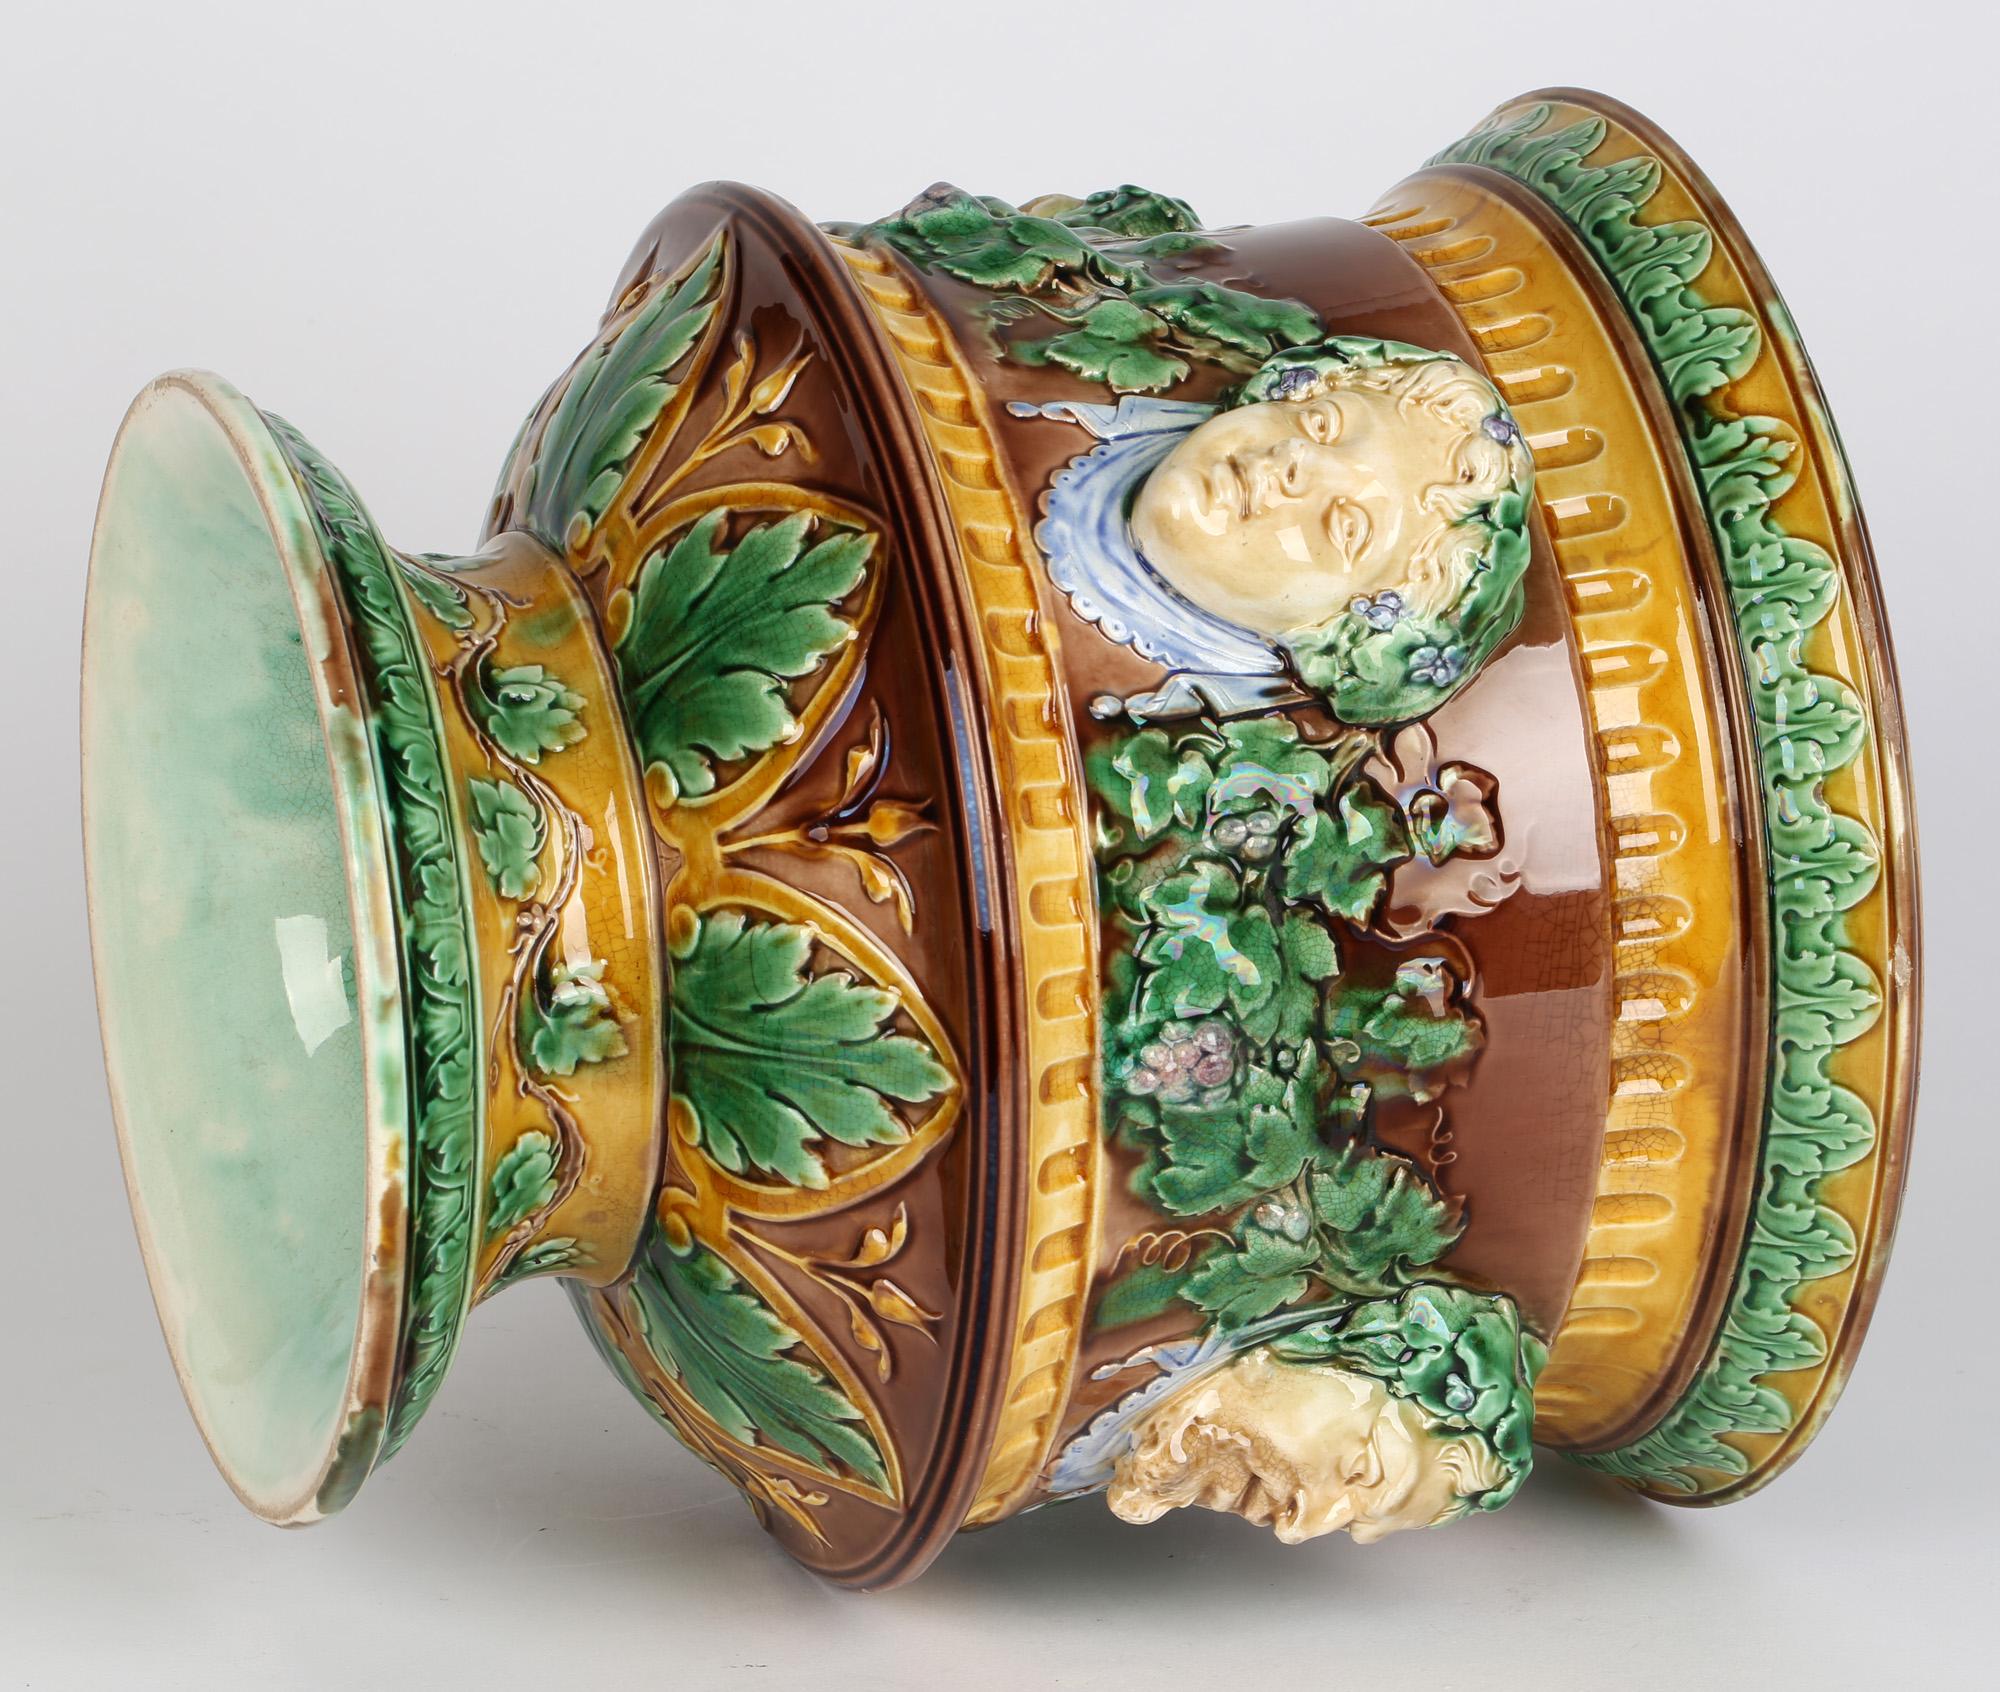 Pottery Wedgwood Large and Impressive Majolica Jardiniere with Masks and Trailing Vines For Sale